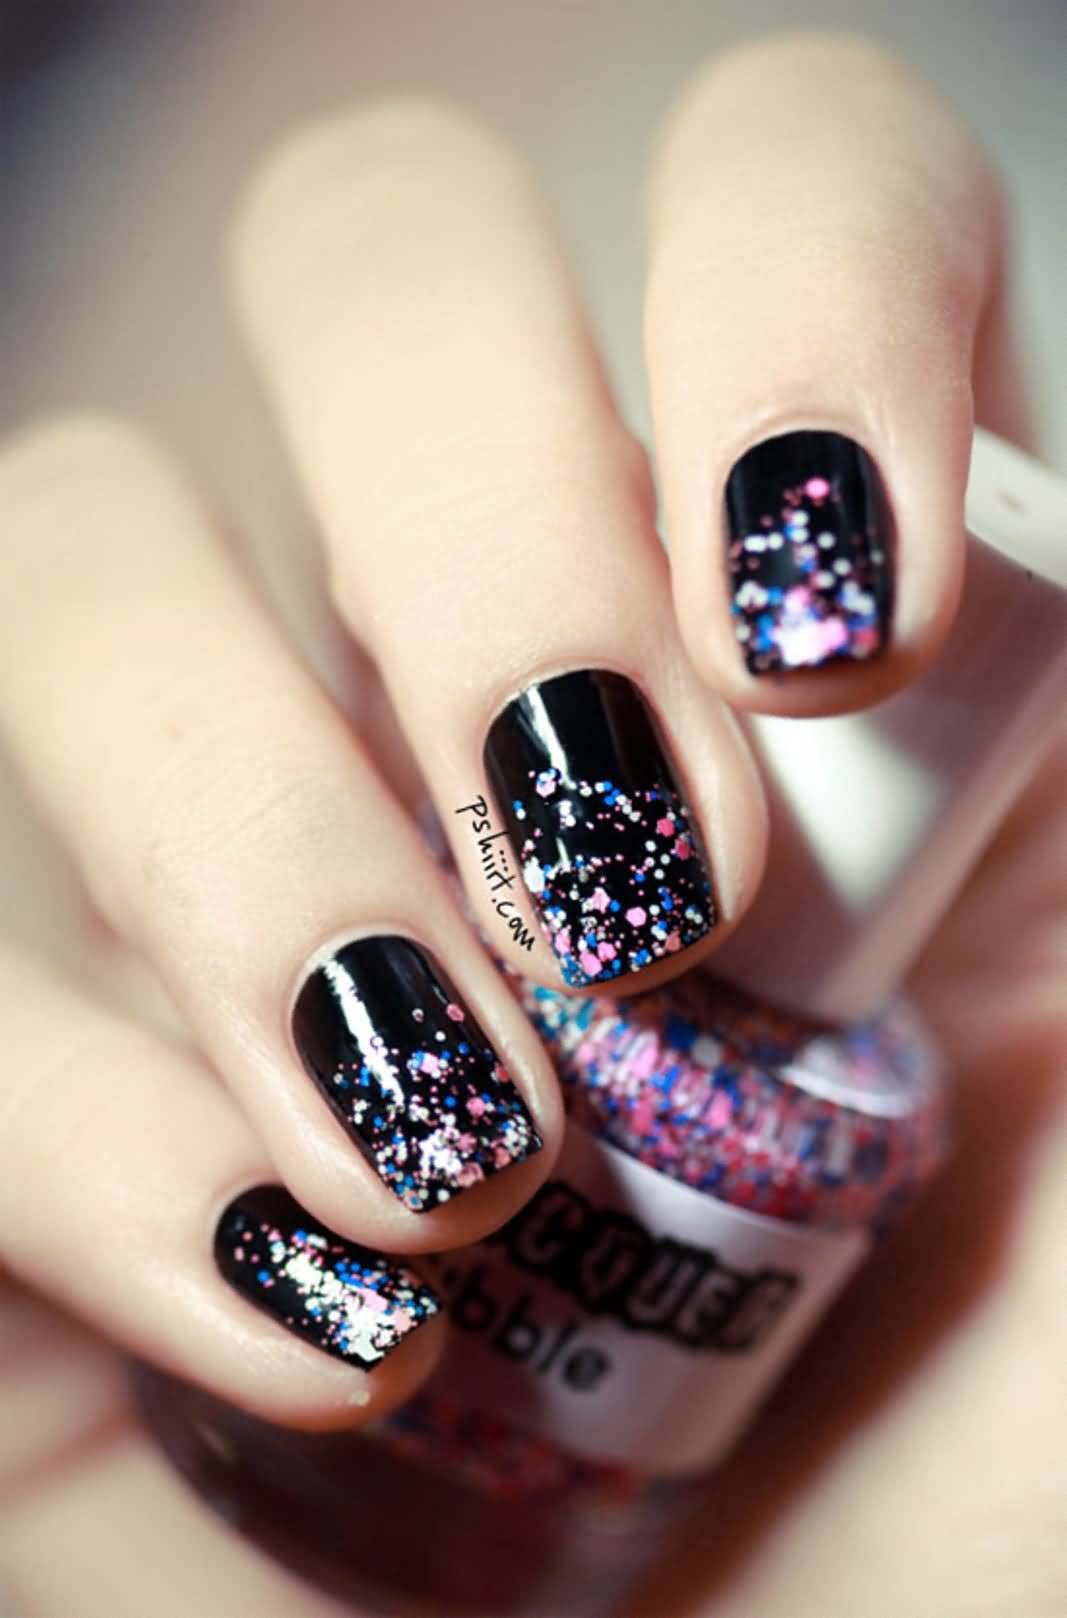 Black Acrylic Nail Art With Colorful Dots Design